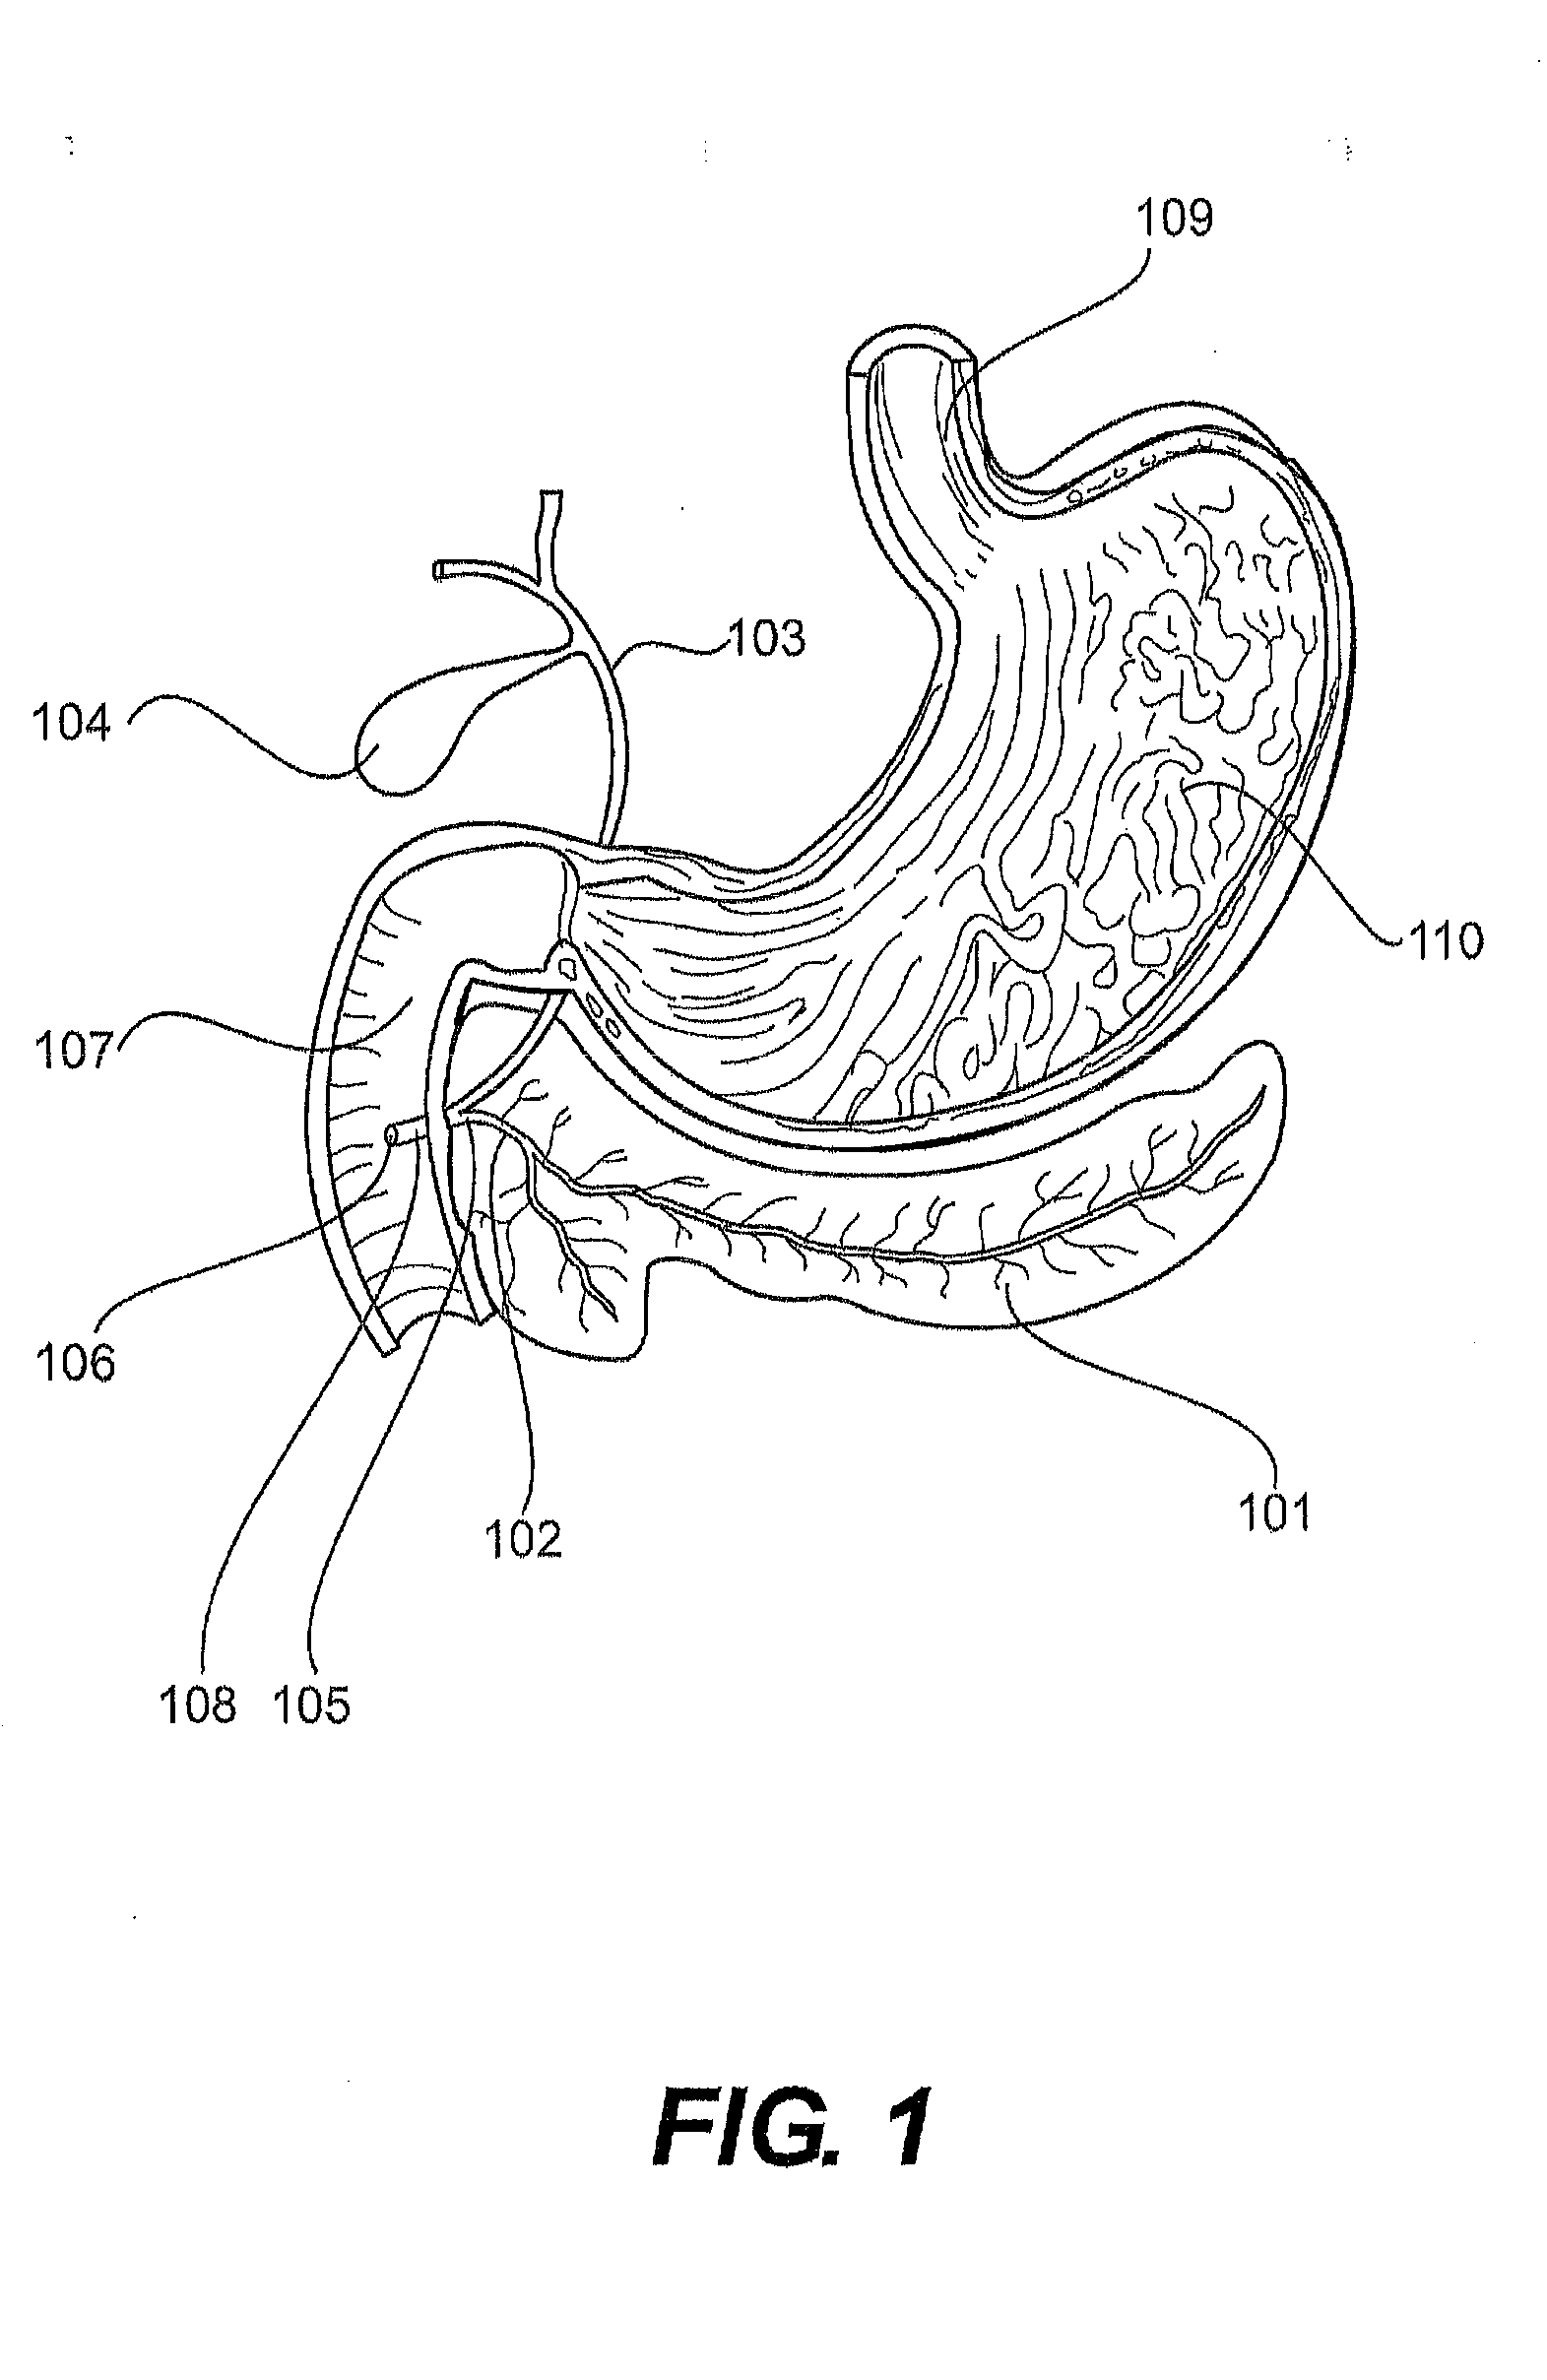 Dual lumen pancreaticobiliary catheter and methods of cannulating the pancreaticobiliary system